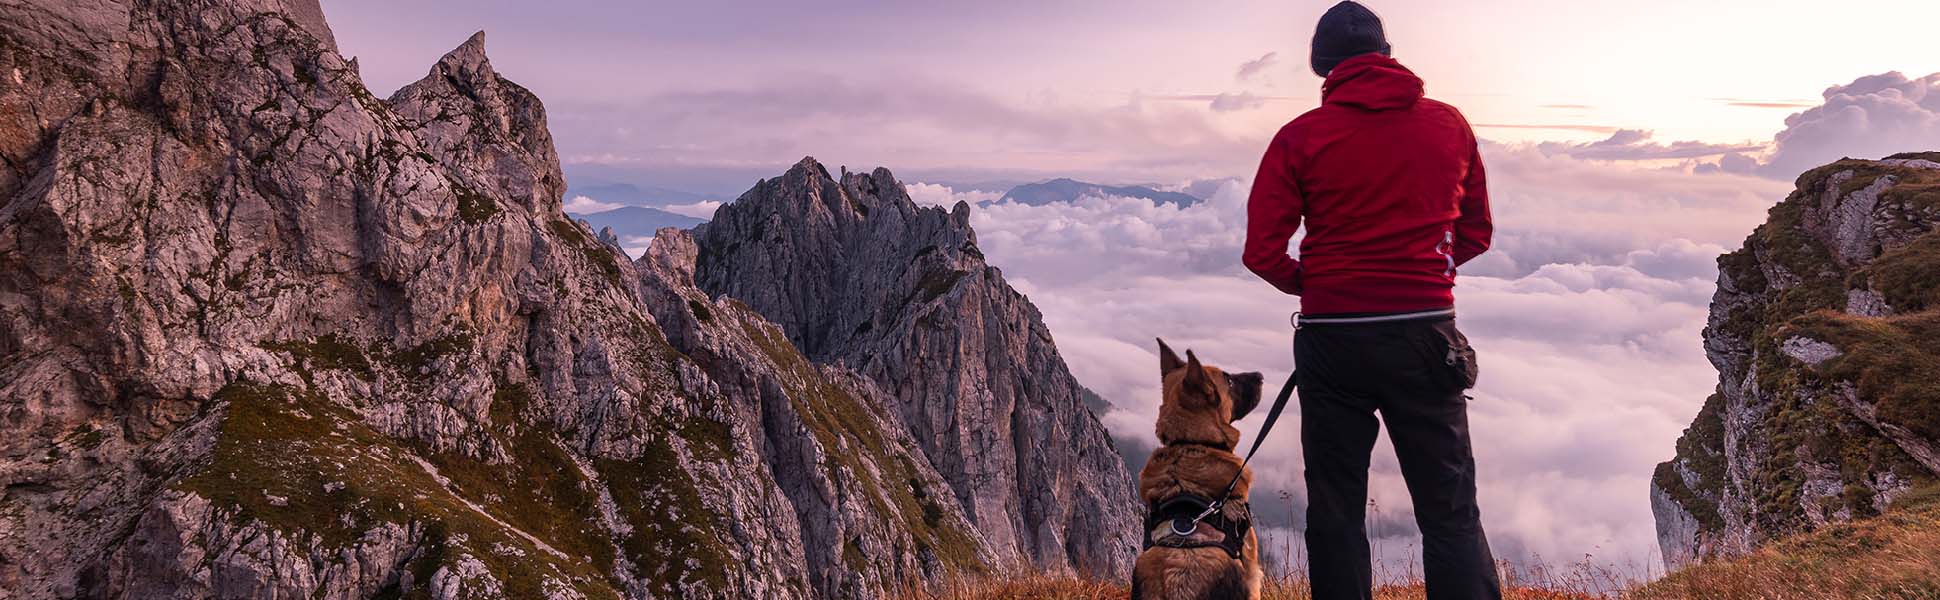 Man in red coat standing on a mountain trail with a german shepherd dog by his side. Man and dog are looking out at a beautiful sunrise over the clouds.